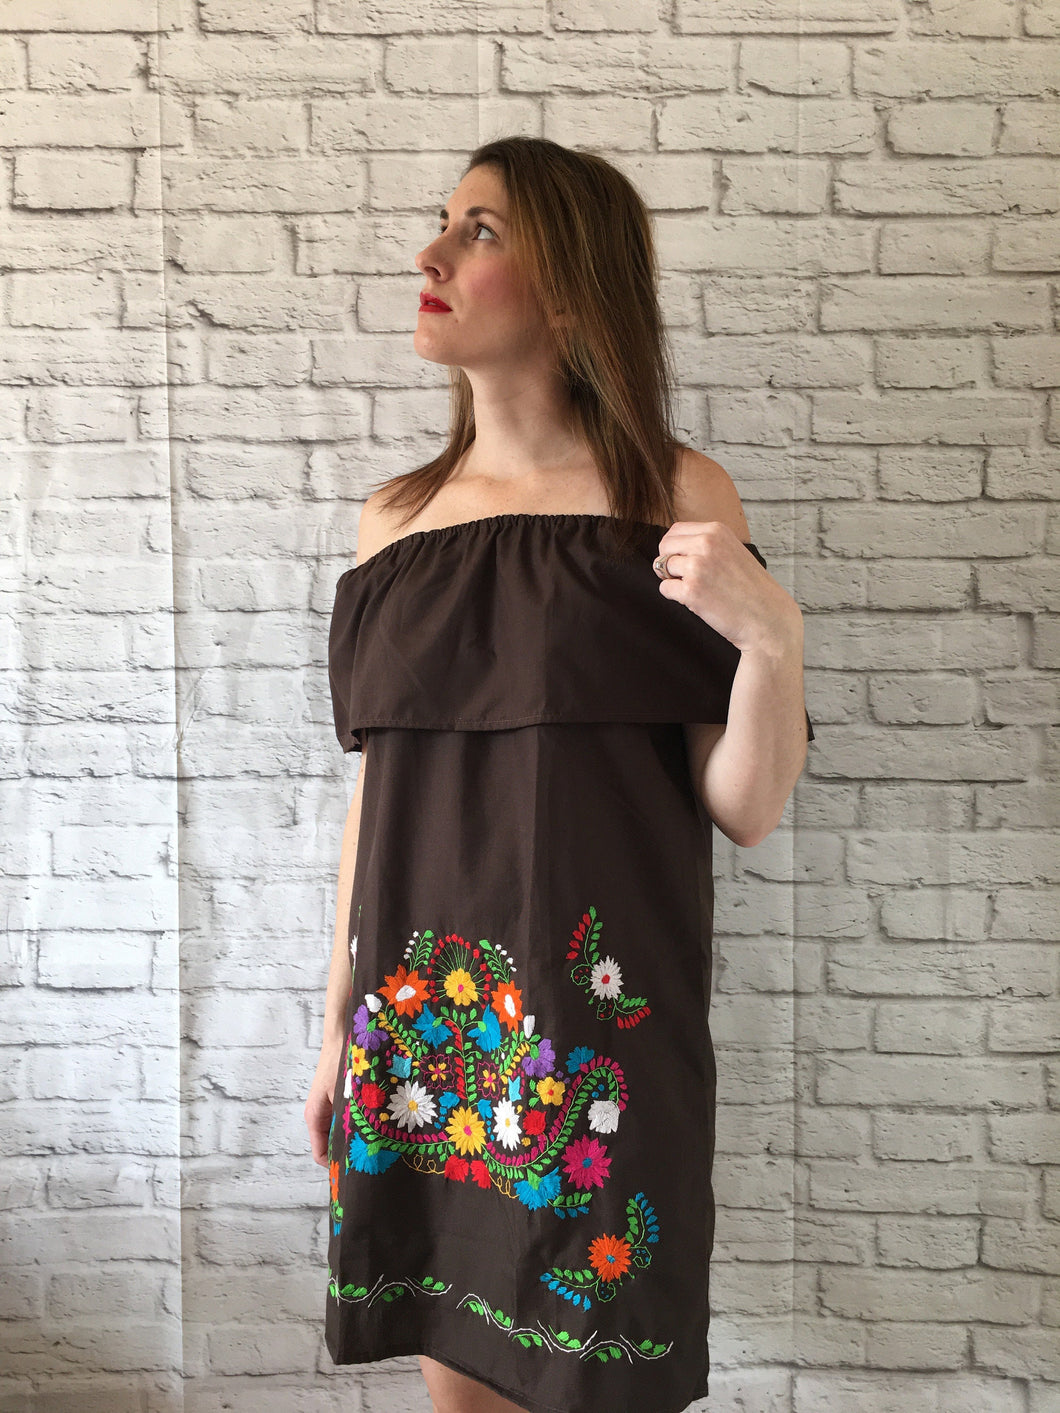 Women's Off the Shoulder Embroidered Brown Mexican Dress - Handmade in Oaxaca, Mexico - Size Medium - Mexican Fiesta - Mexican Wedding